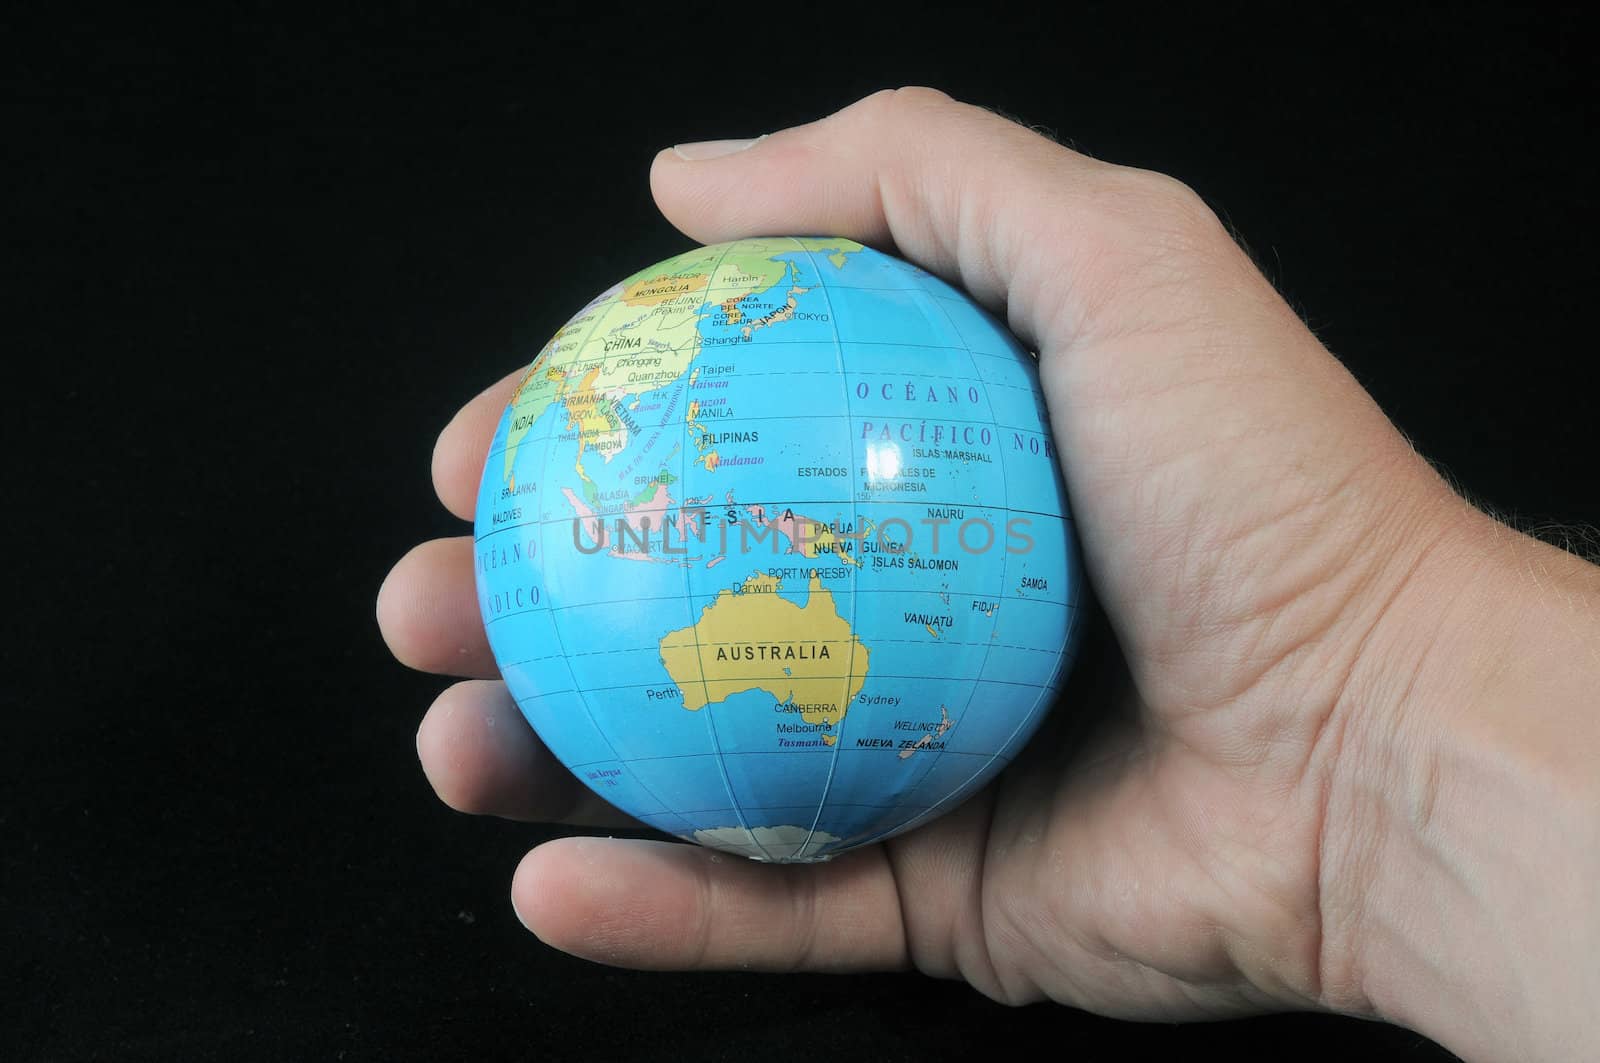 Globe in an  hand on a black background